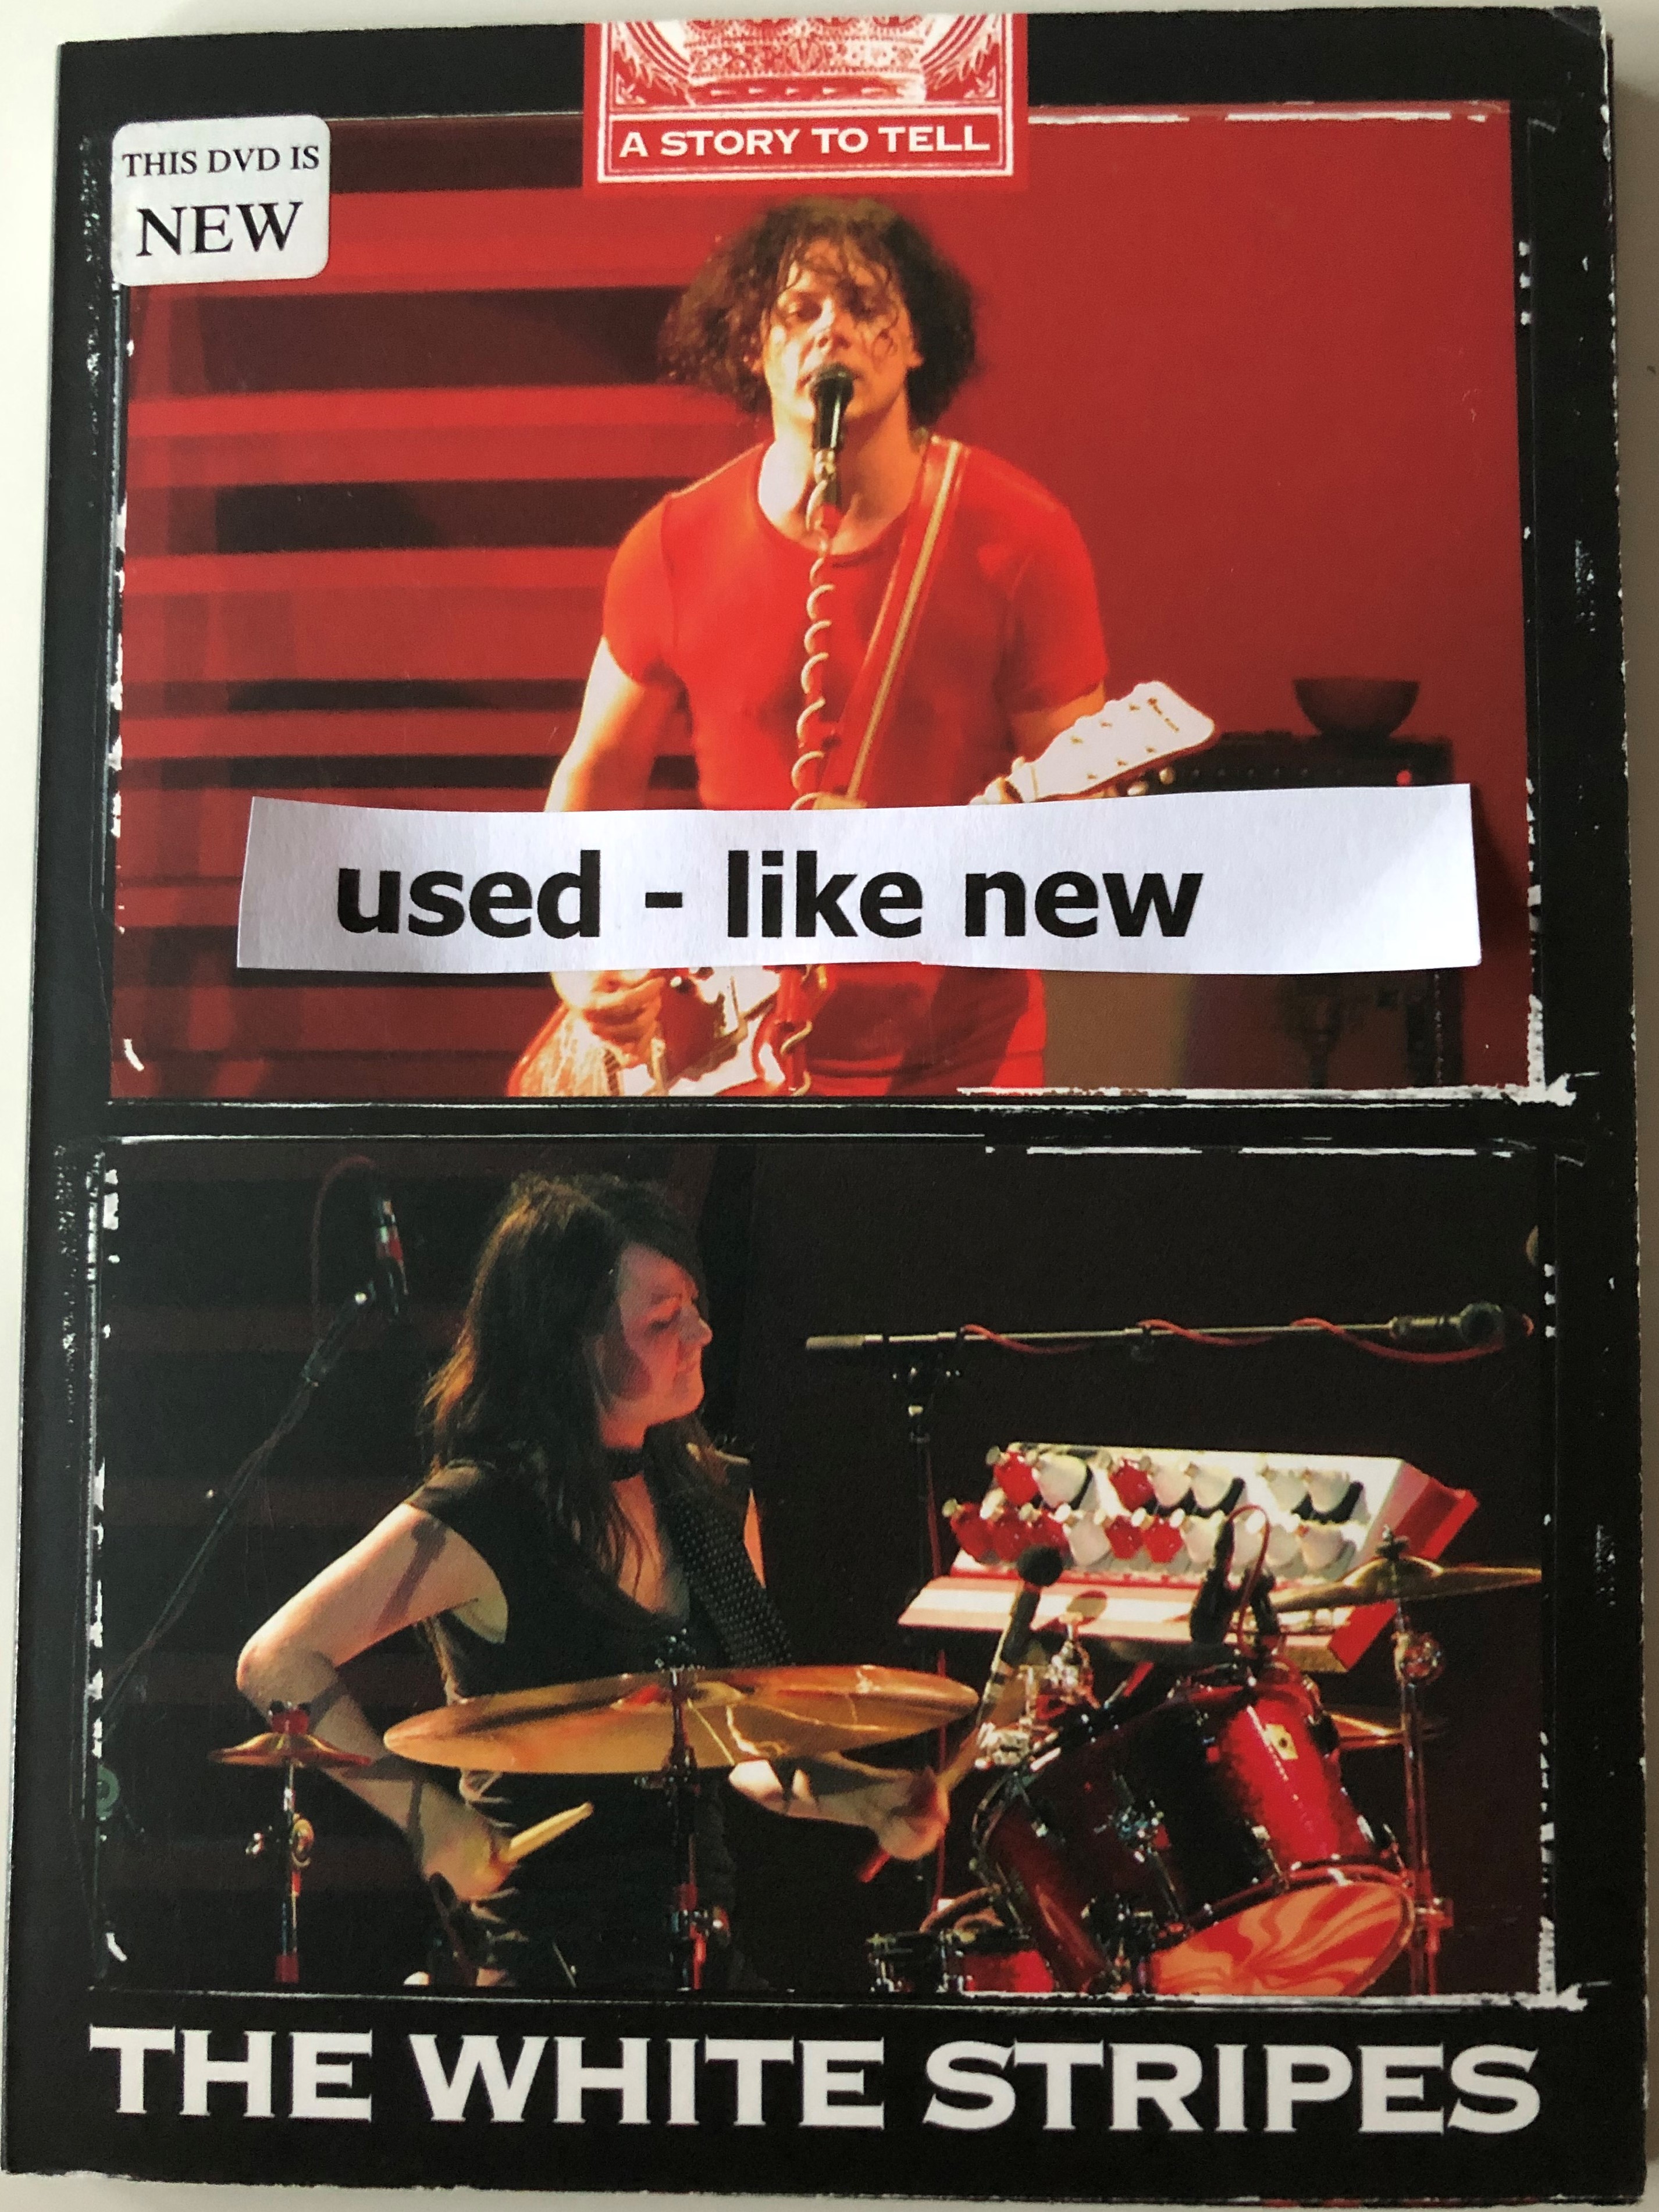 the-white-stripes-dvd-2007-a-story-to-tell-5.jpg